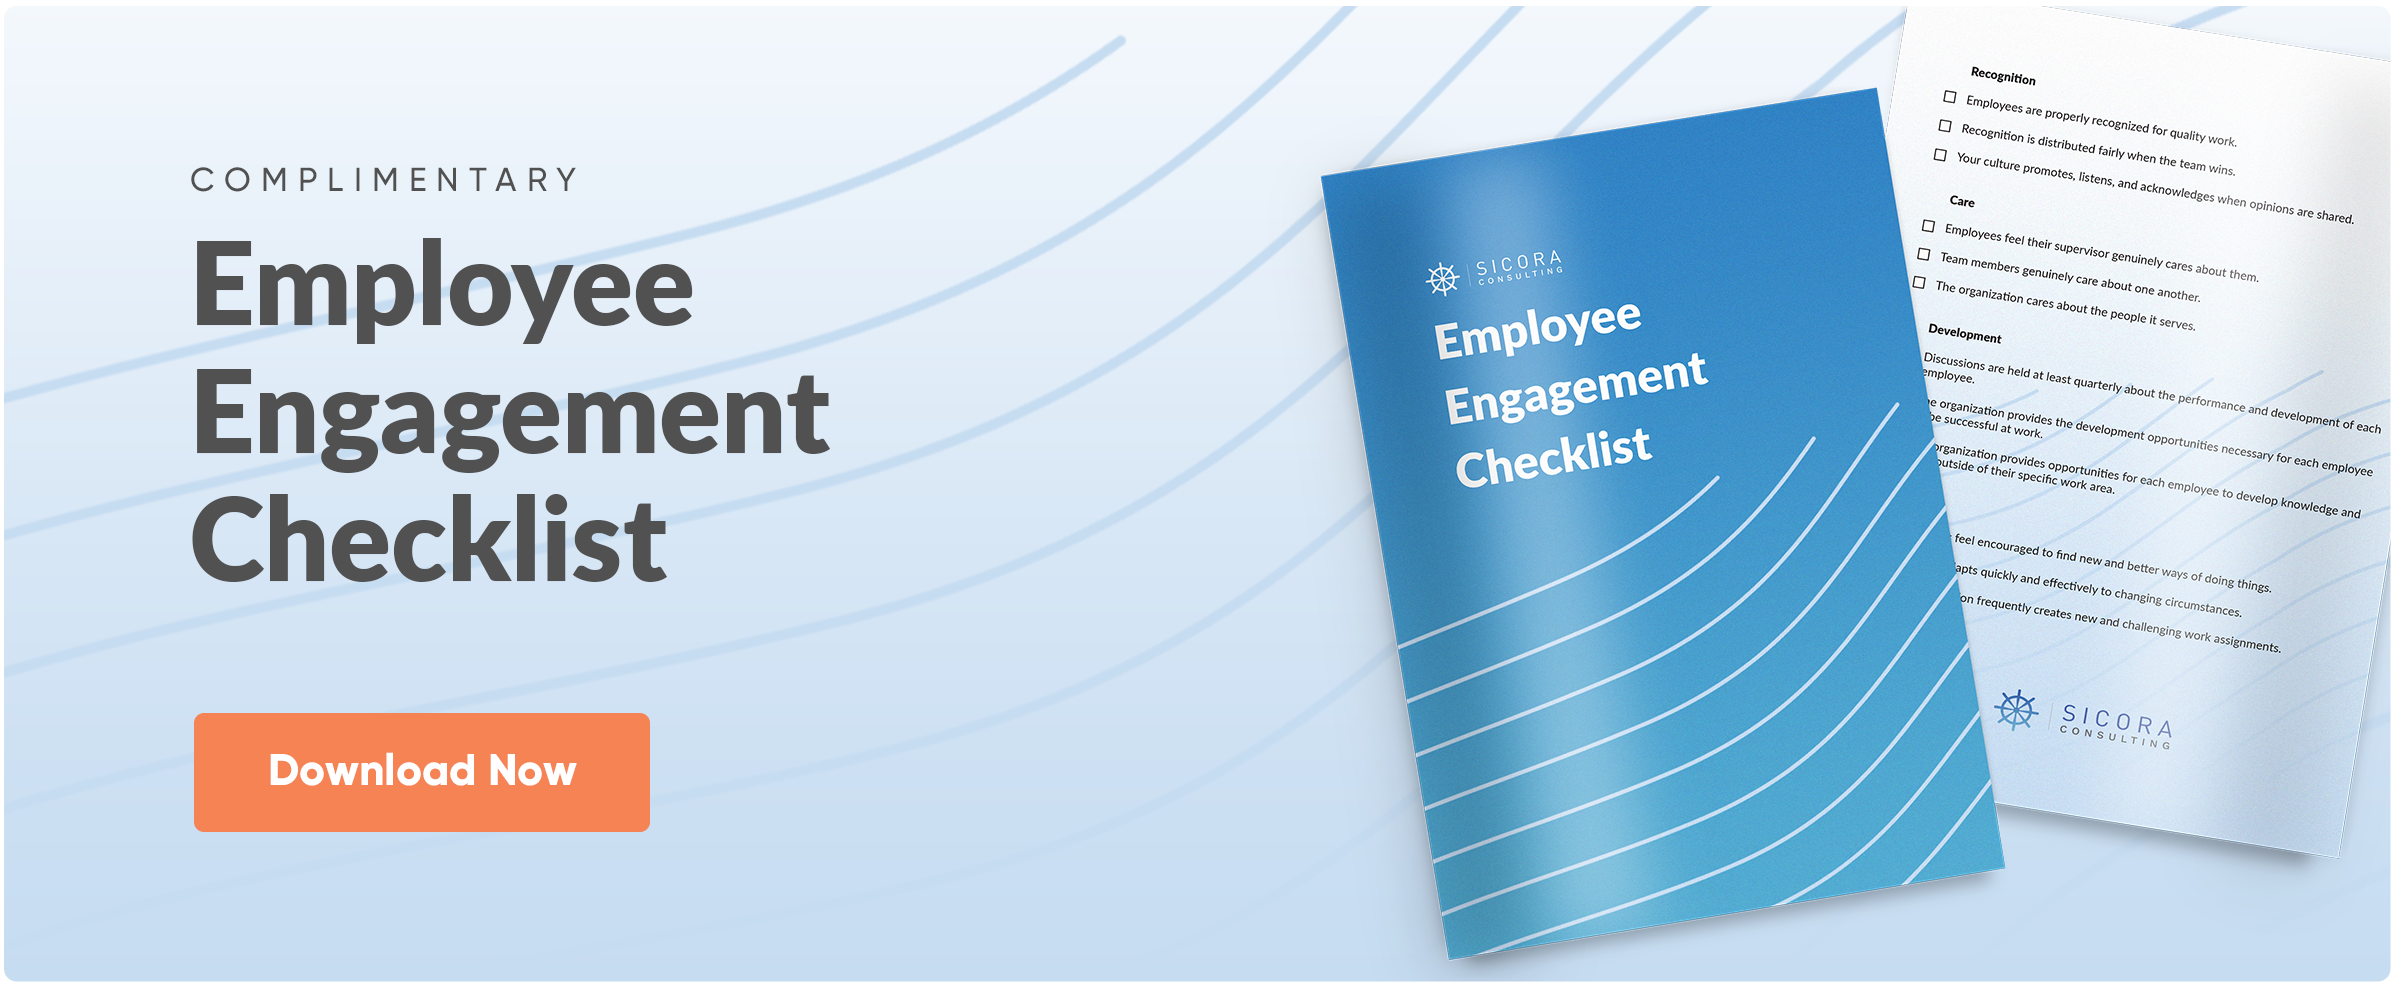 complimentary employee engagement checklist